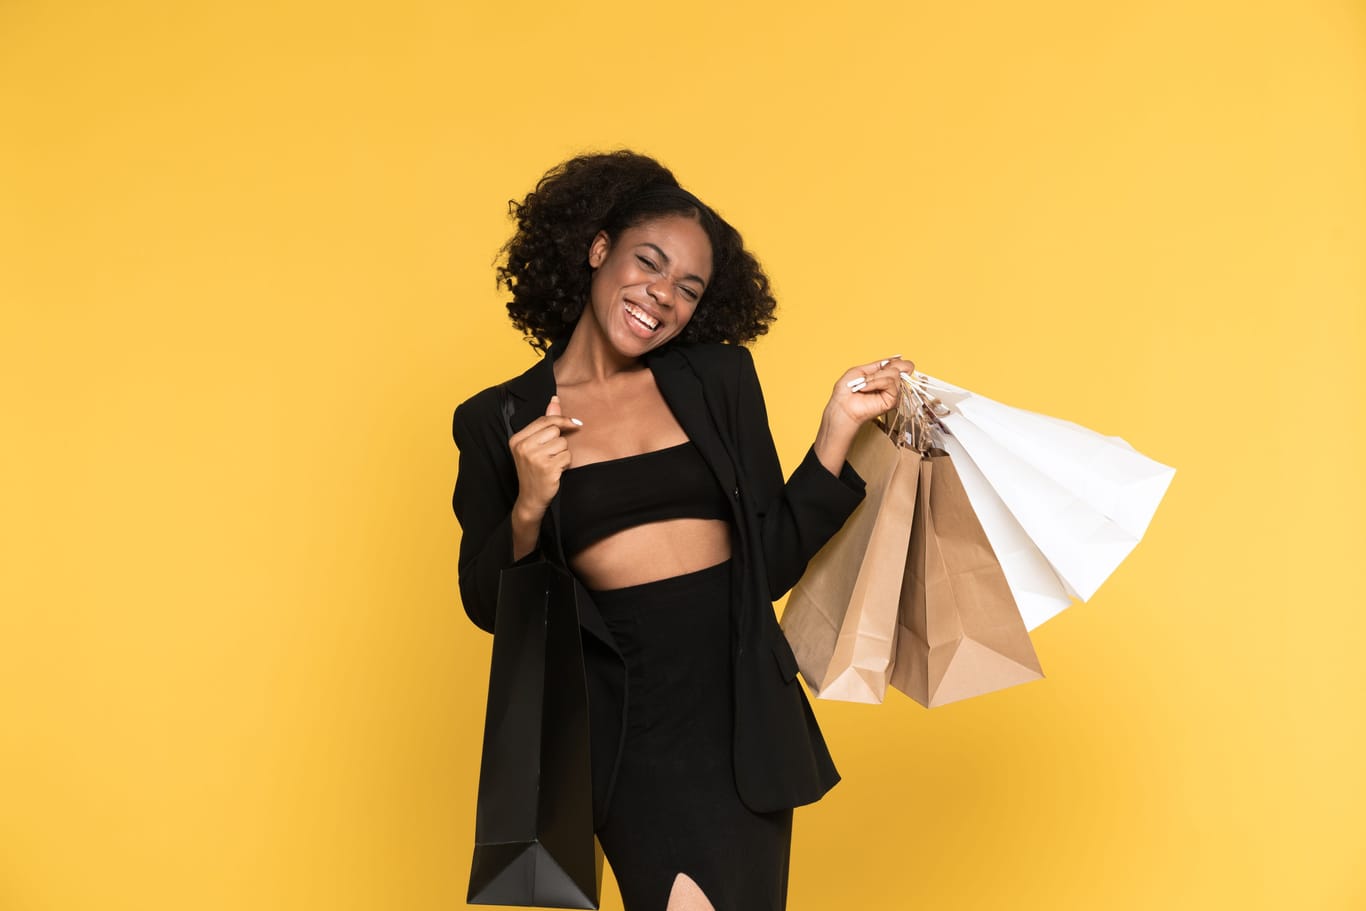 Young black woman laughing while posing with shopping bags